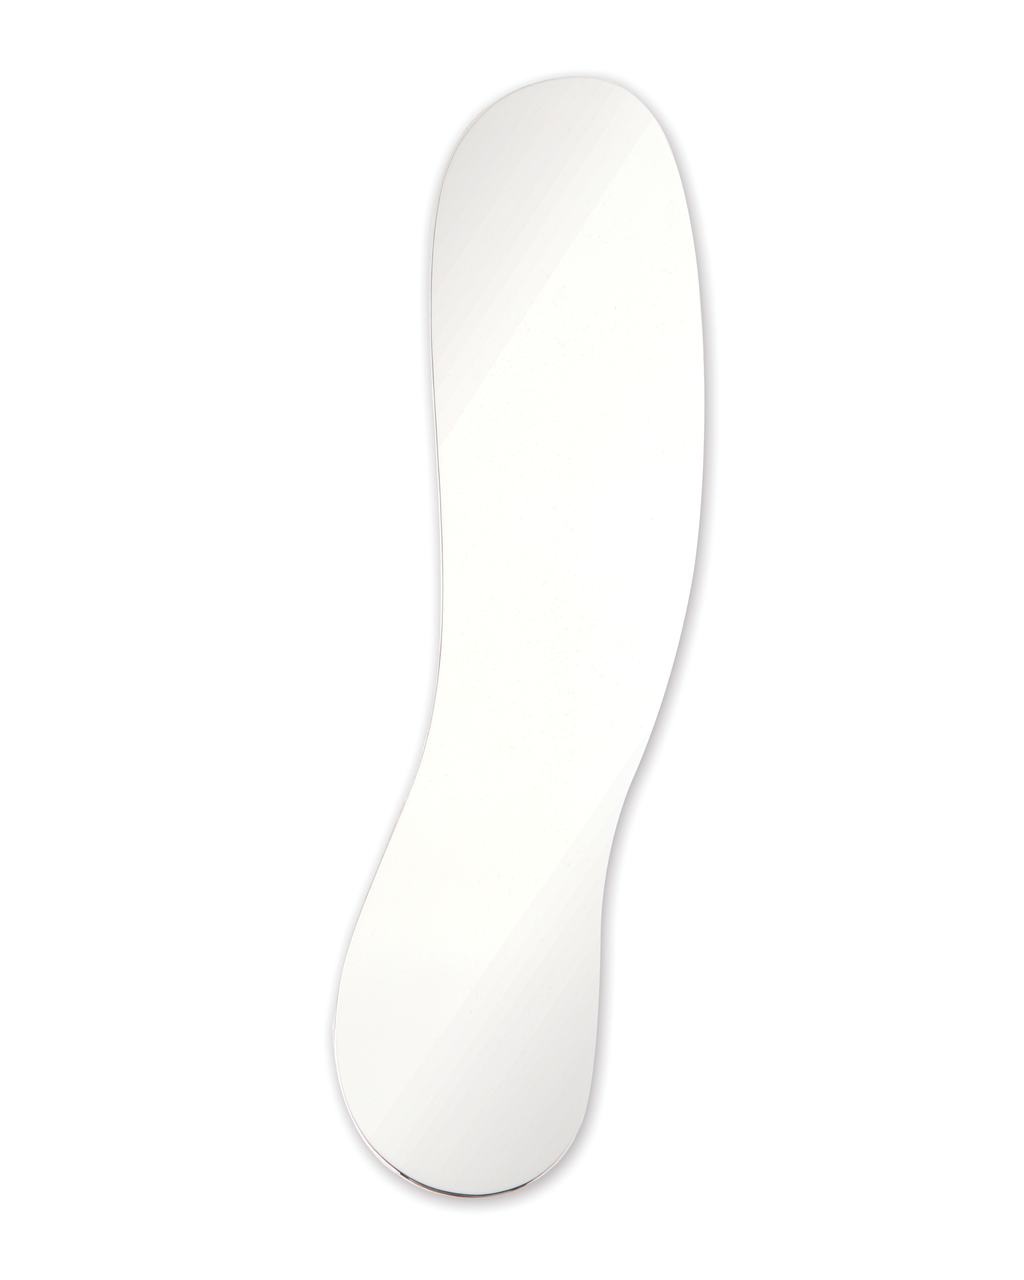 One-Sided Lingual Intraoral Mirror (Narrow)